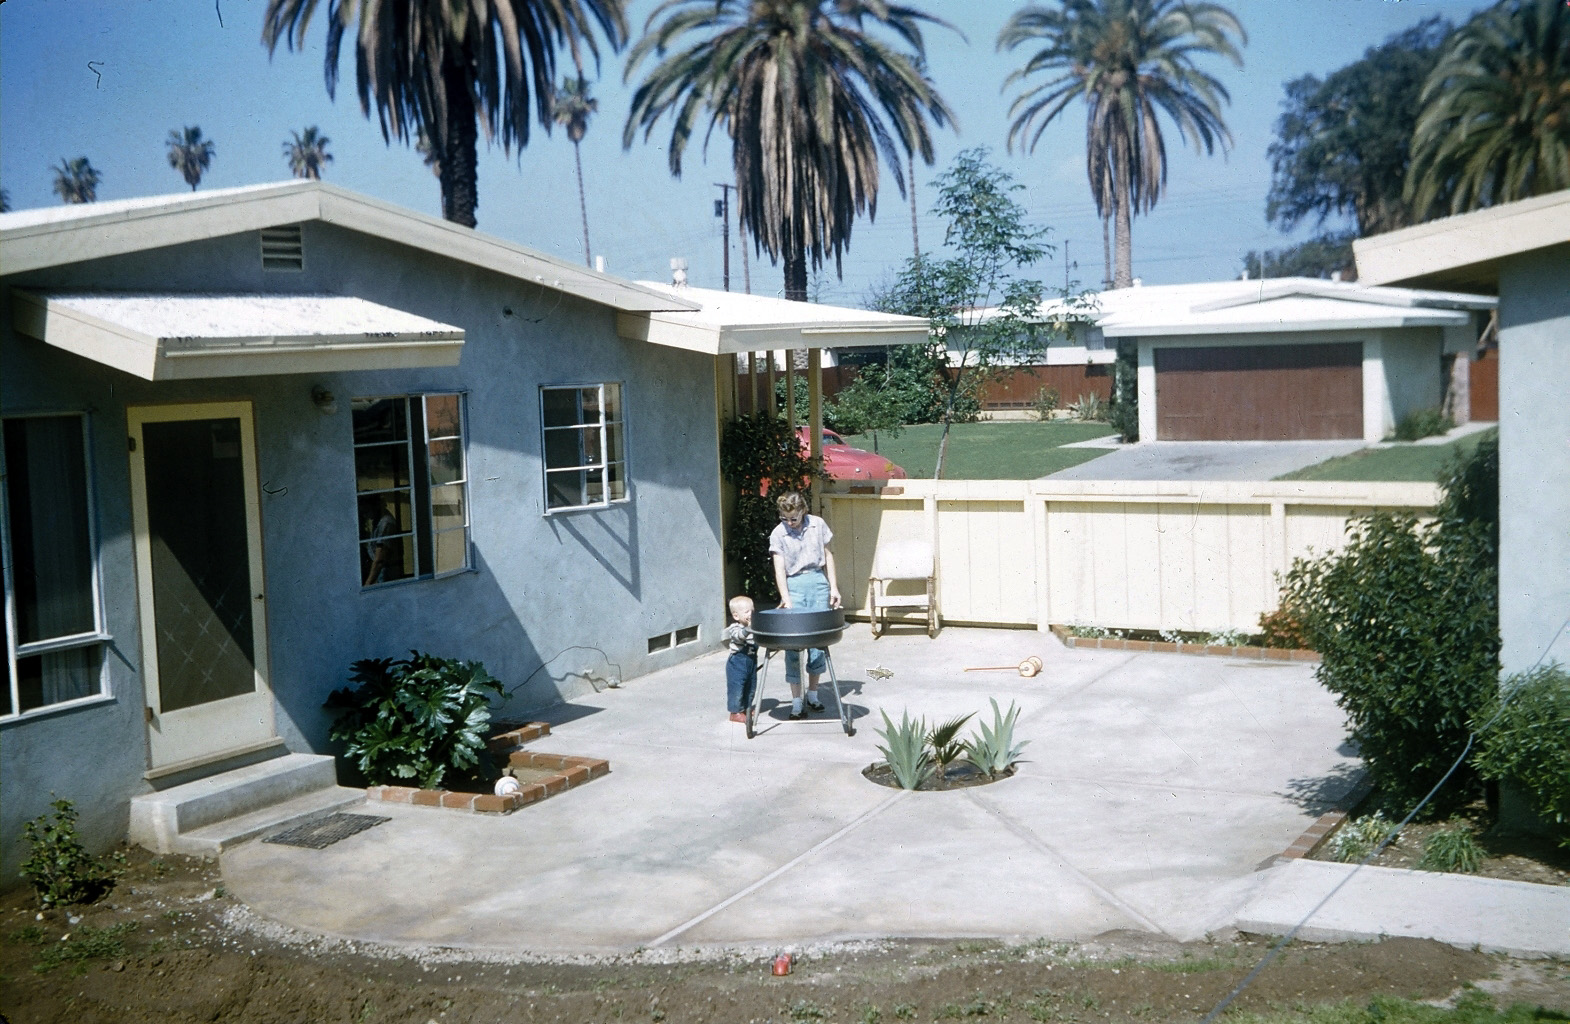 This is our backyard and patio in beautiful West Covina, CA about 1957. Mom and I are getting the BBQ set up for Dad. Those are agave and palm plants in the center of the patio, I think. The screen door leads to the living room. The window to the left of the screen door opens onto the dining room, where my family was having their Christmas dinner. View full size.